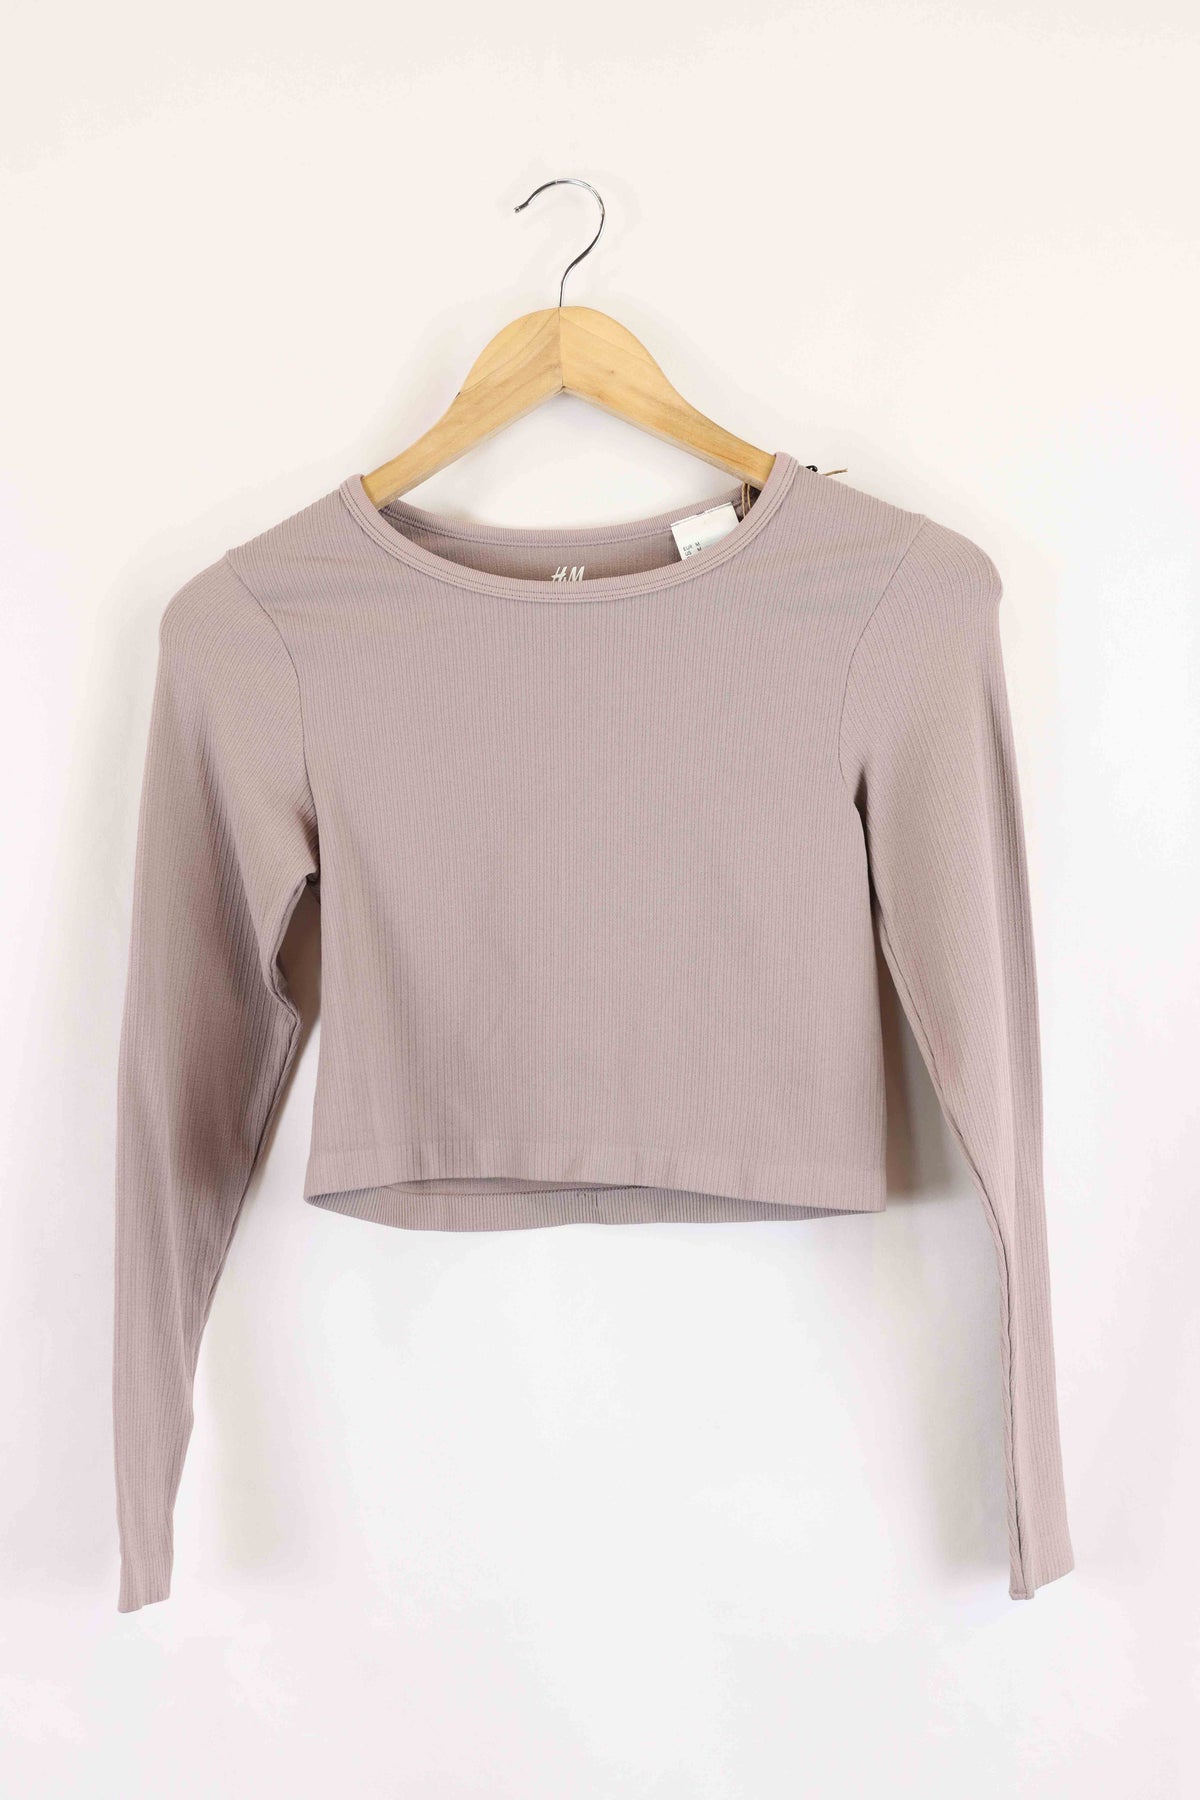 H&amp;M Purple Long Sleeve Cropped Top M